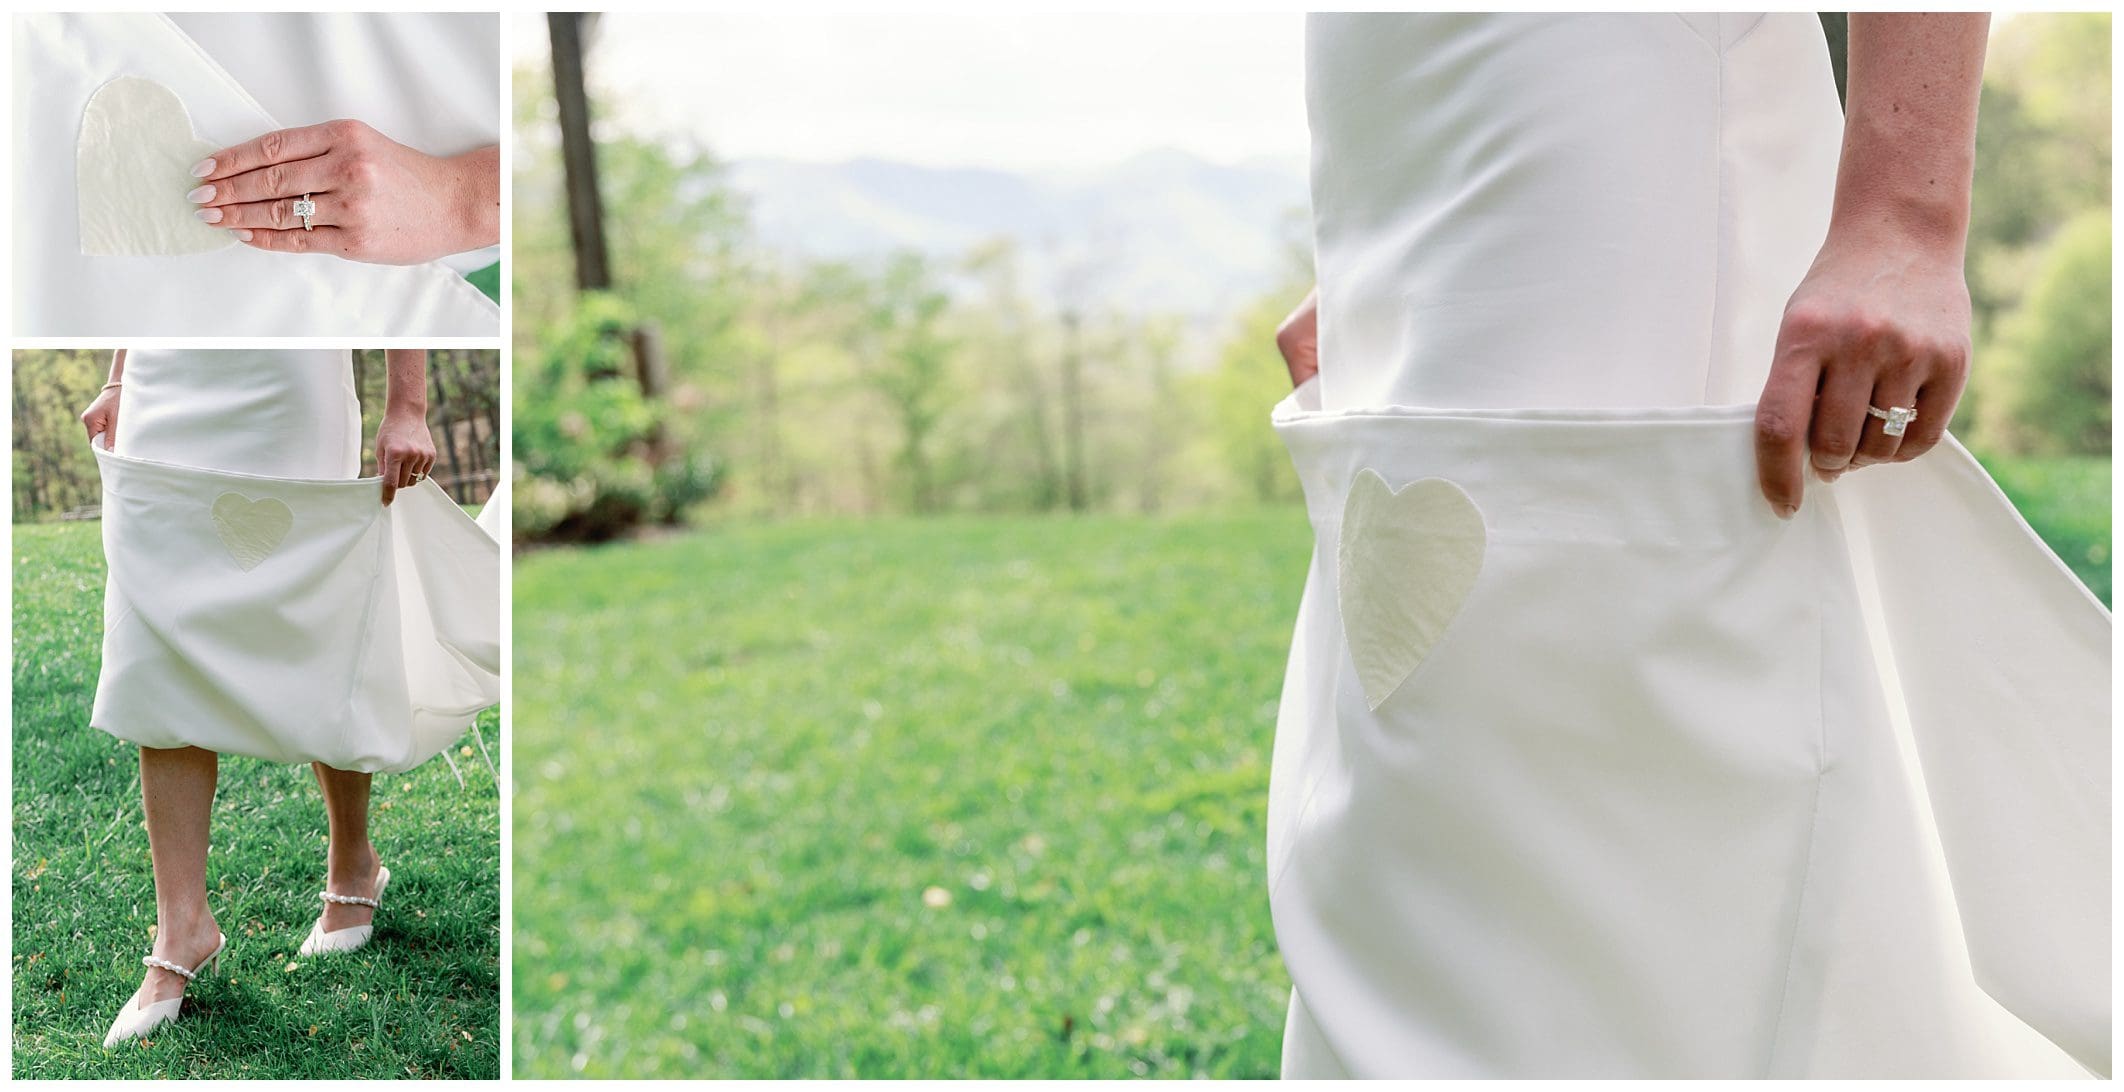 A bride in a white dress with heart cutouts, holding her skirt while walking in a grassy field, with scenic mountains in the background.